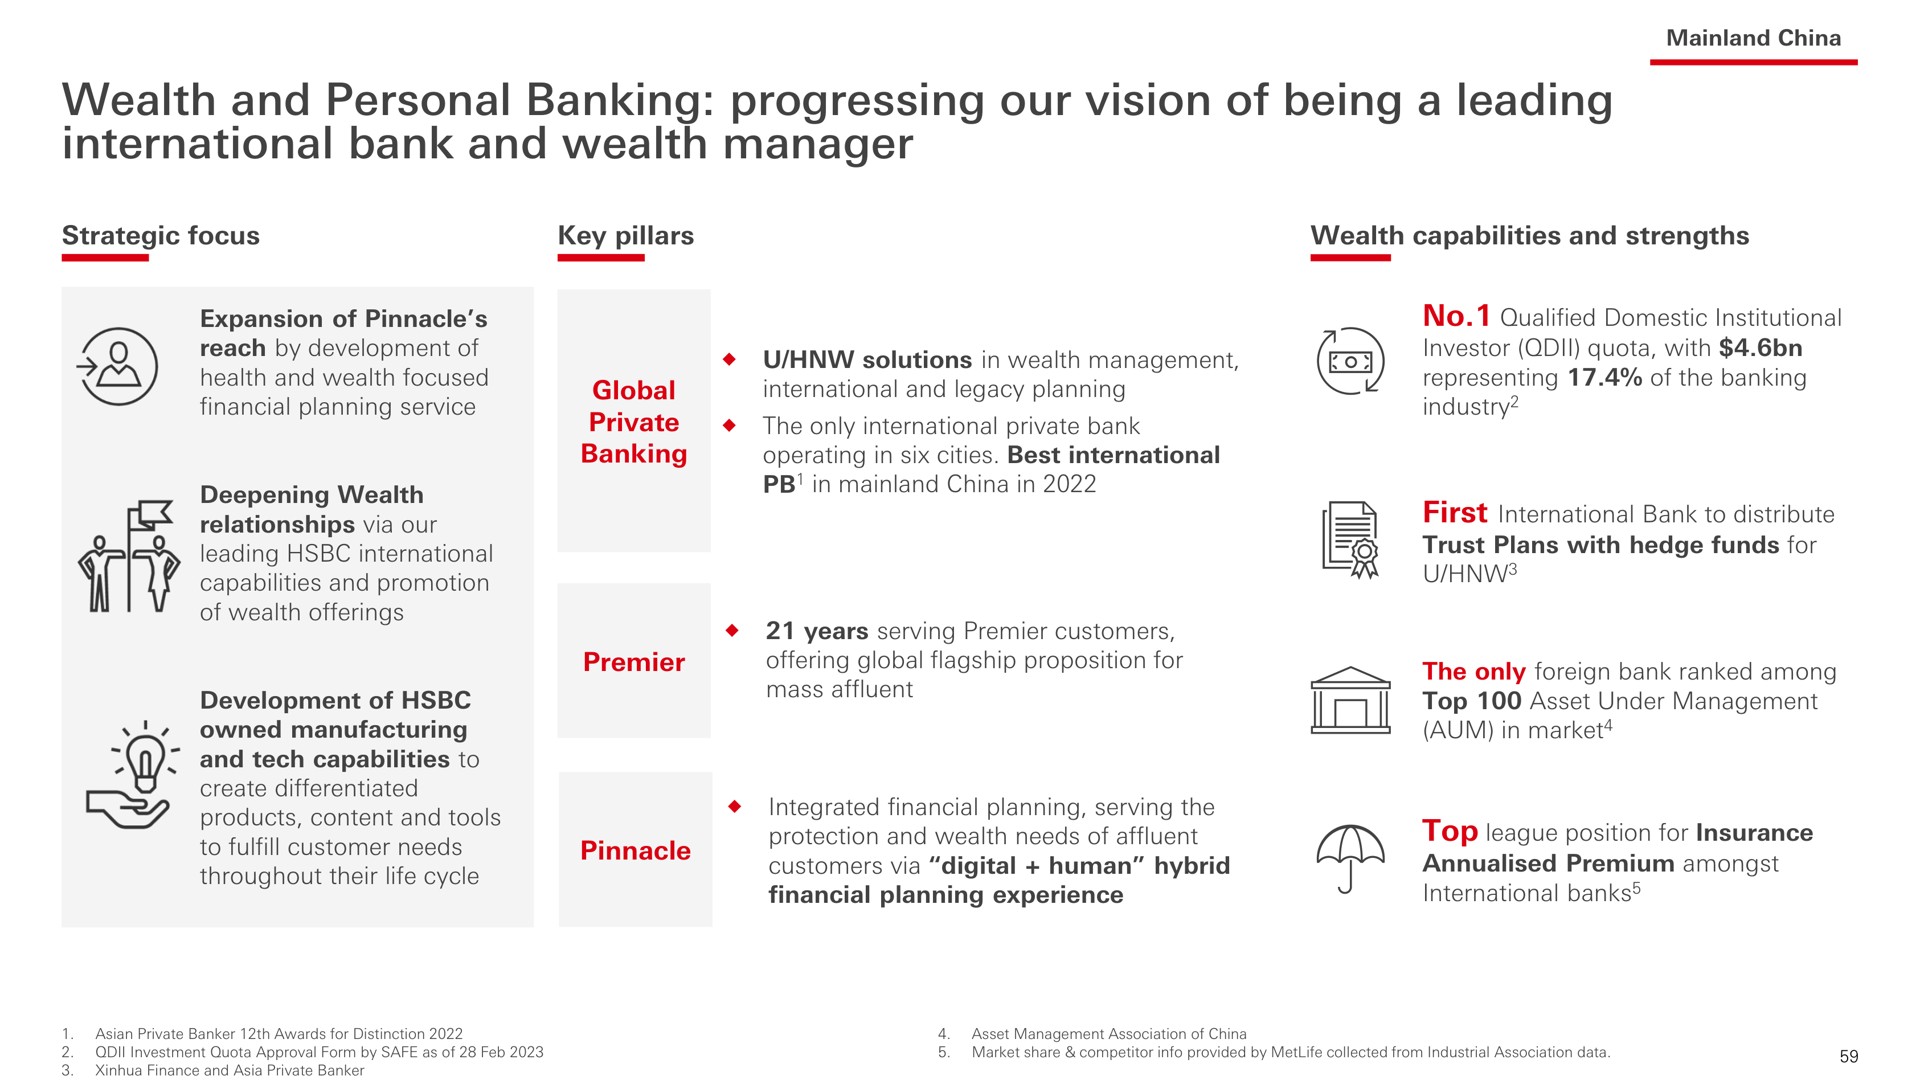 wealth and personal banking progressing our vision of being a leading international bank and wealth manager tech capabilities to | HSBC